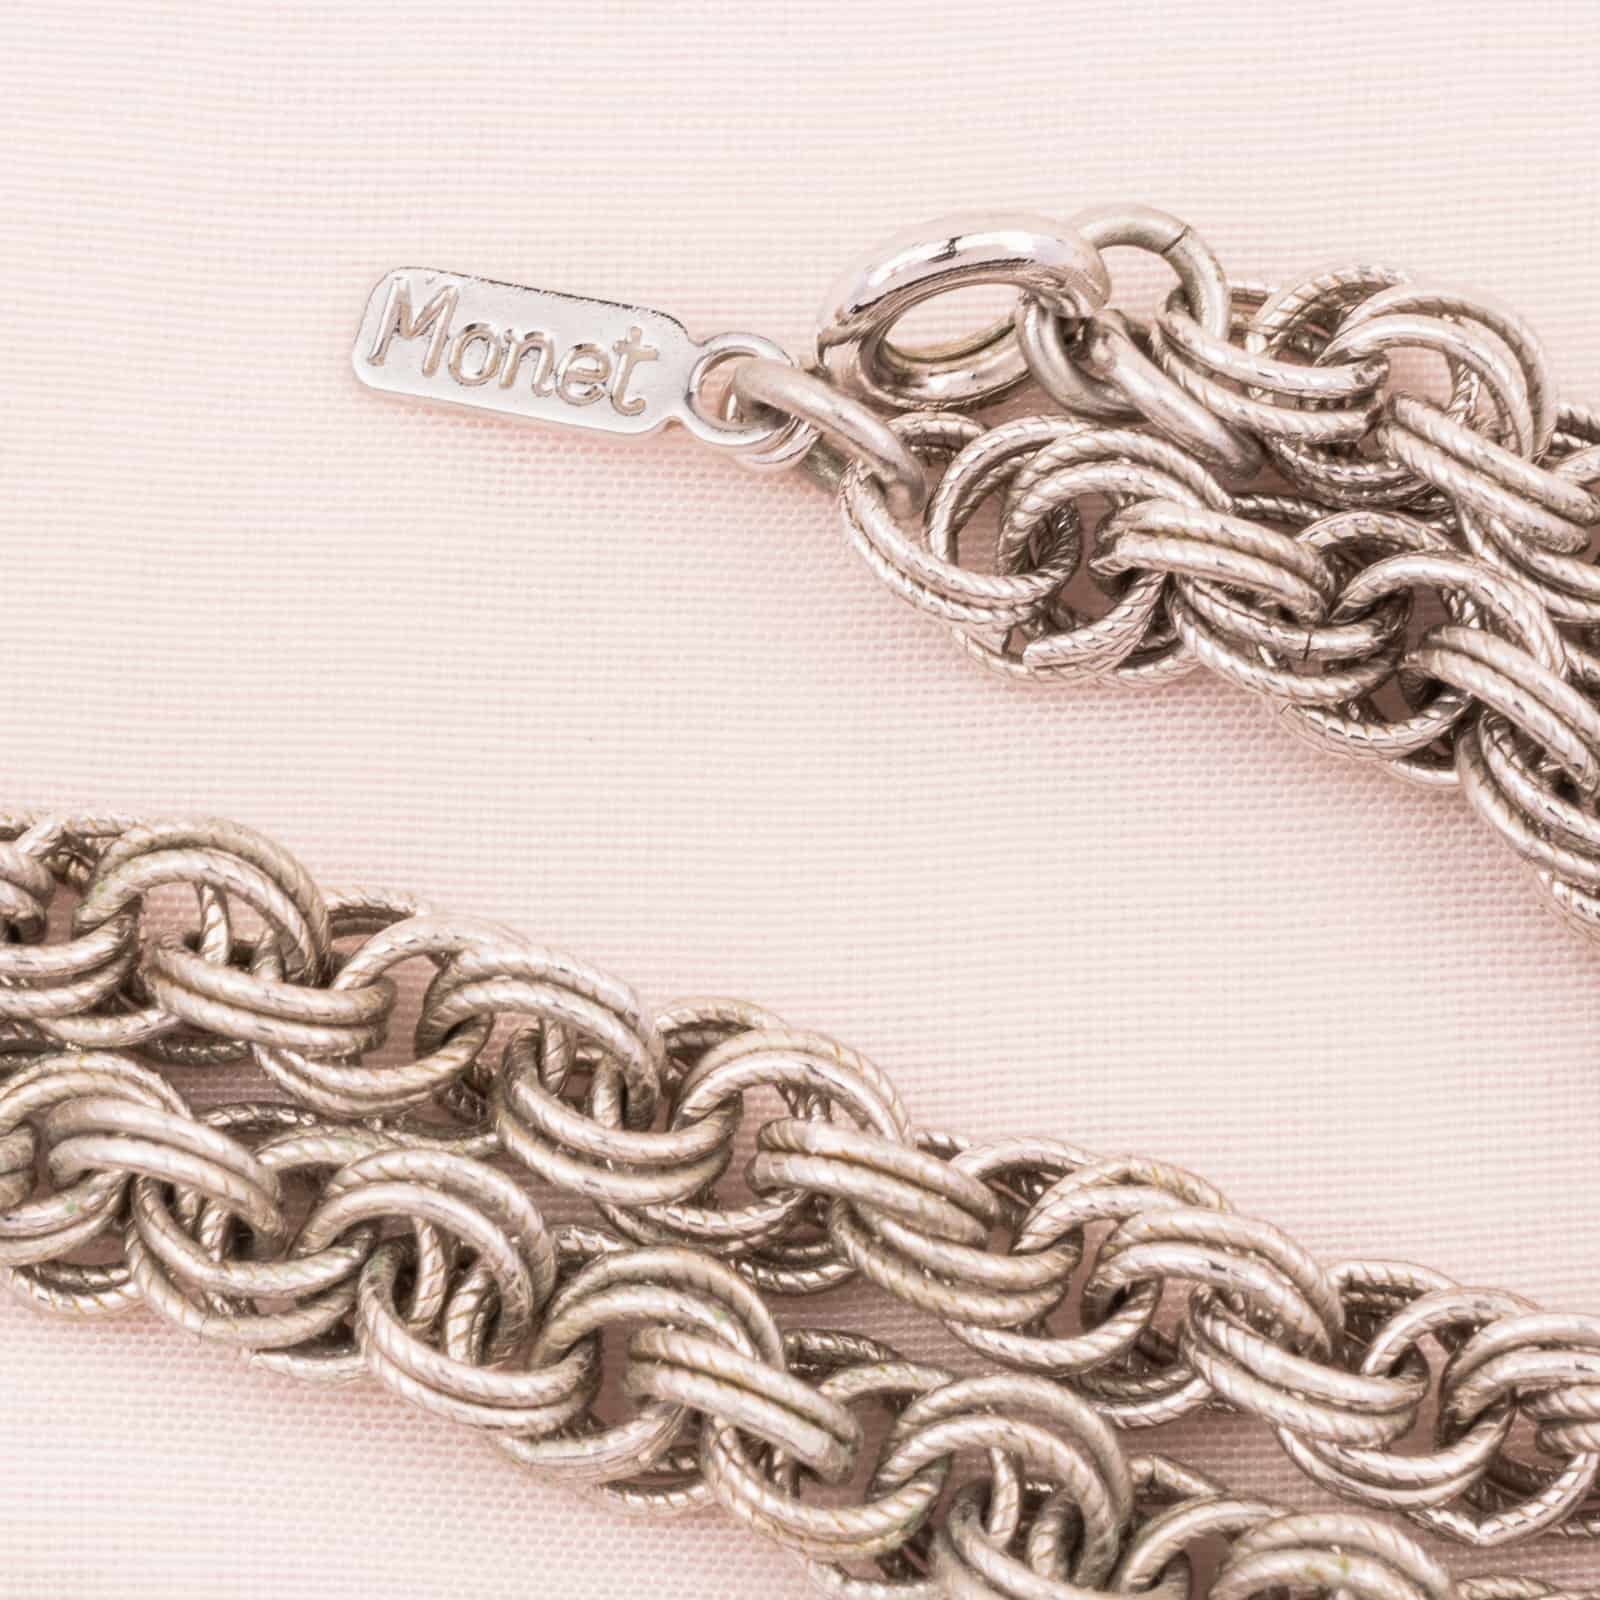 Monet Silver Tone Rope Chain Necklace, 27.5 Inches - Etsy